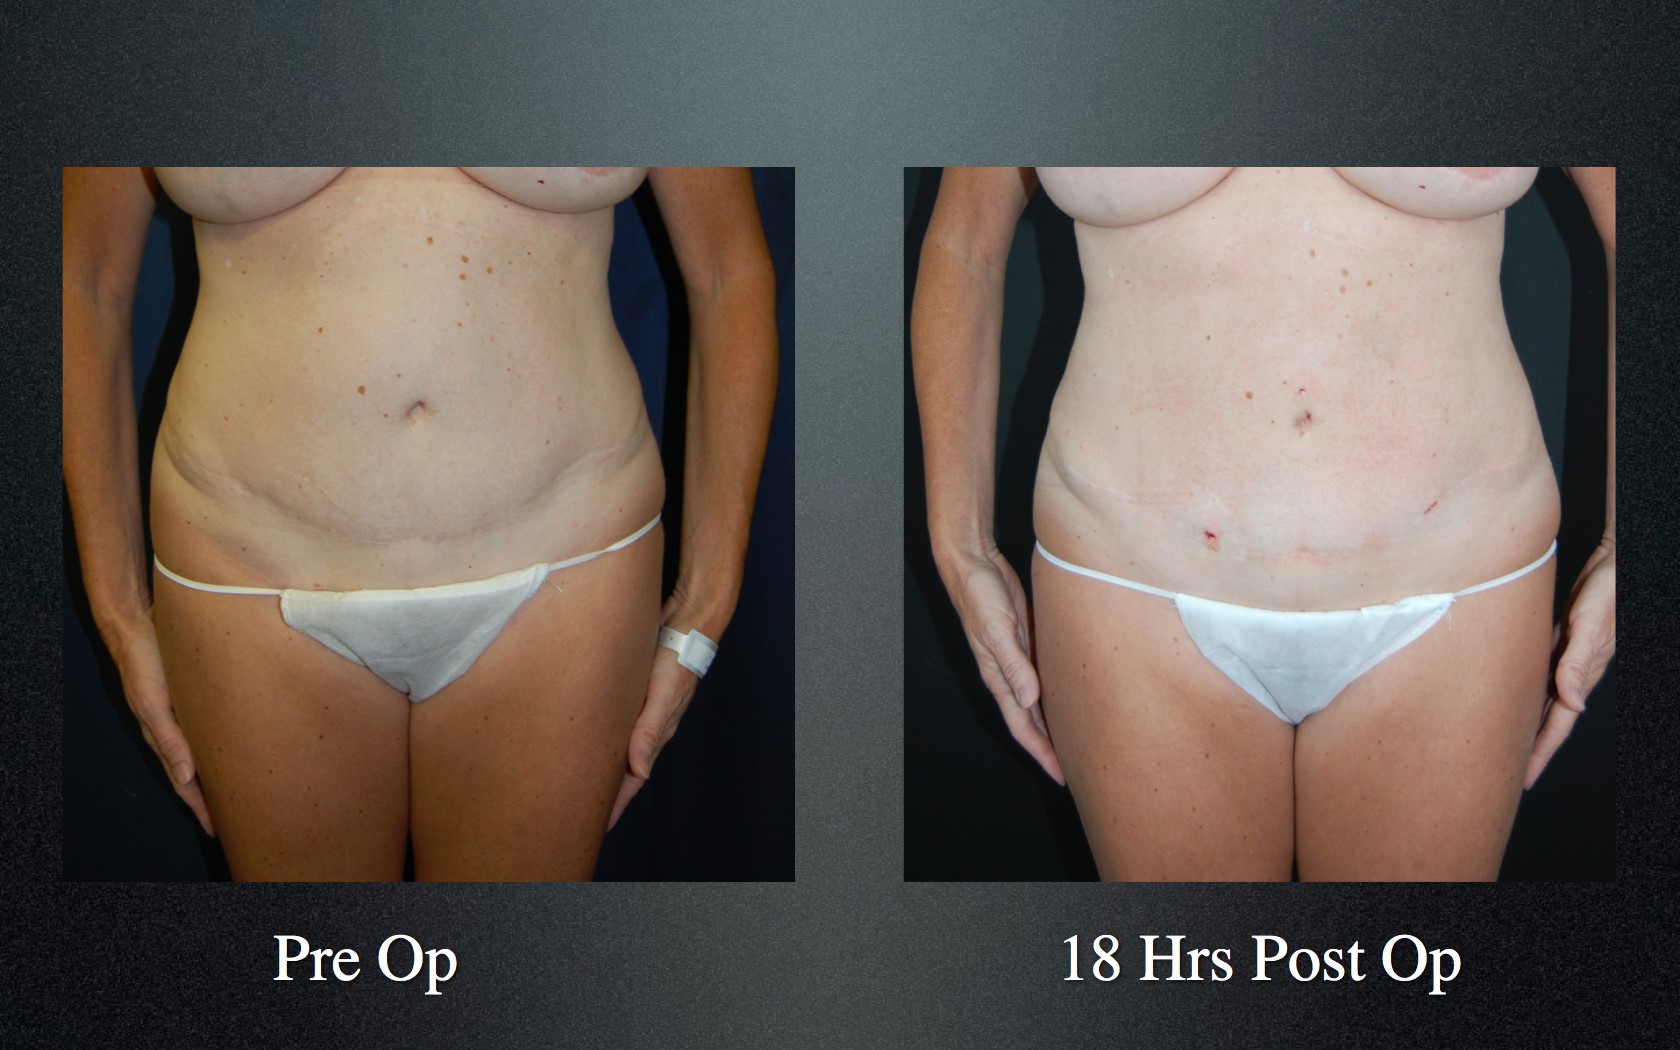 slimlipo before and after